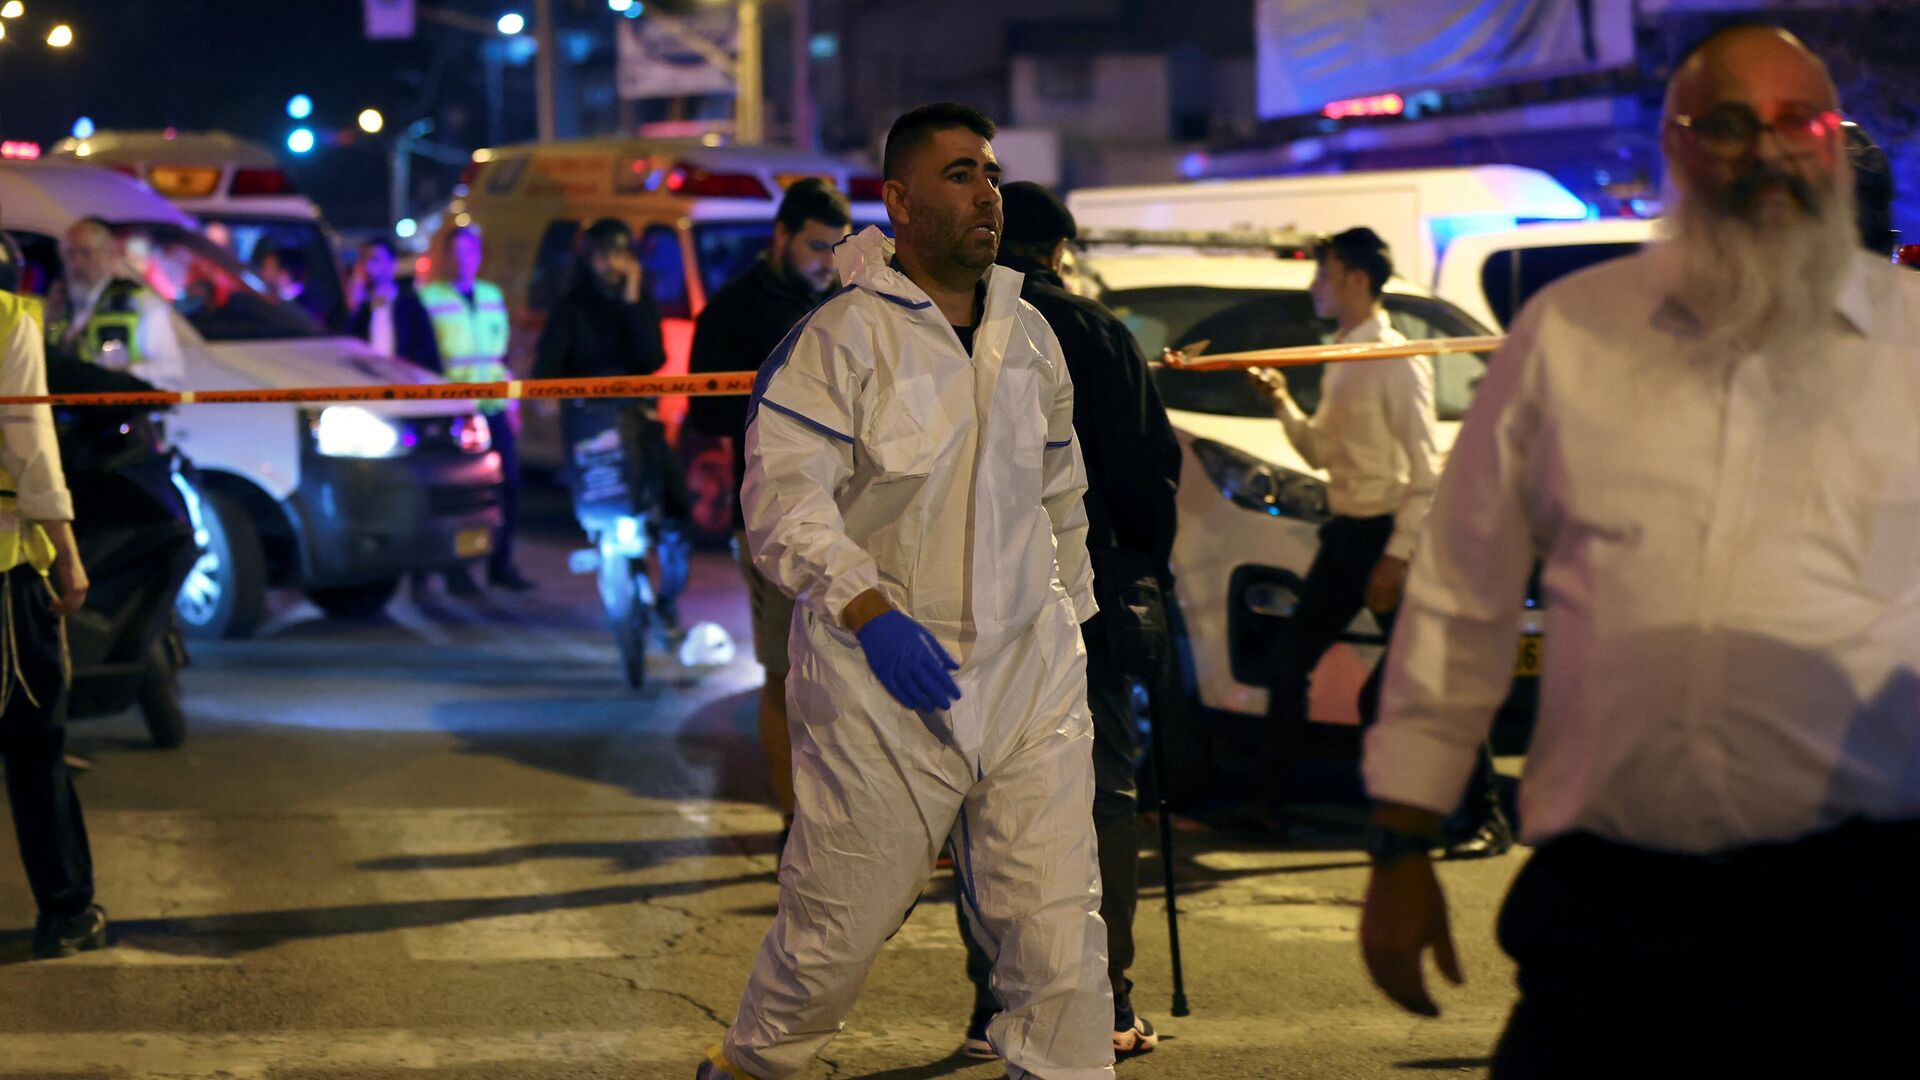 Israeli police forensics experts work at the scene of an attack in which people were killed by a gunman on a main street in Bnei Brak, near Tel Aviv, Israel, March 29, 2022. - Sputnik International, 1920, 01.04.2022